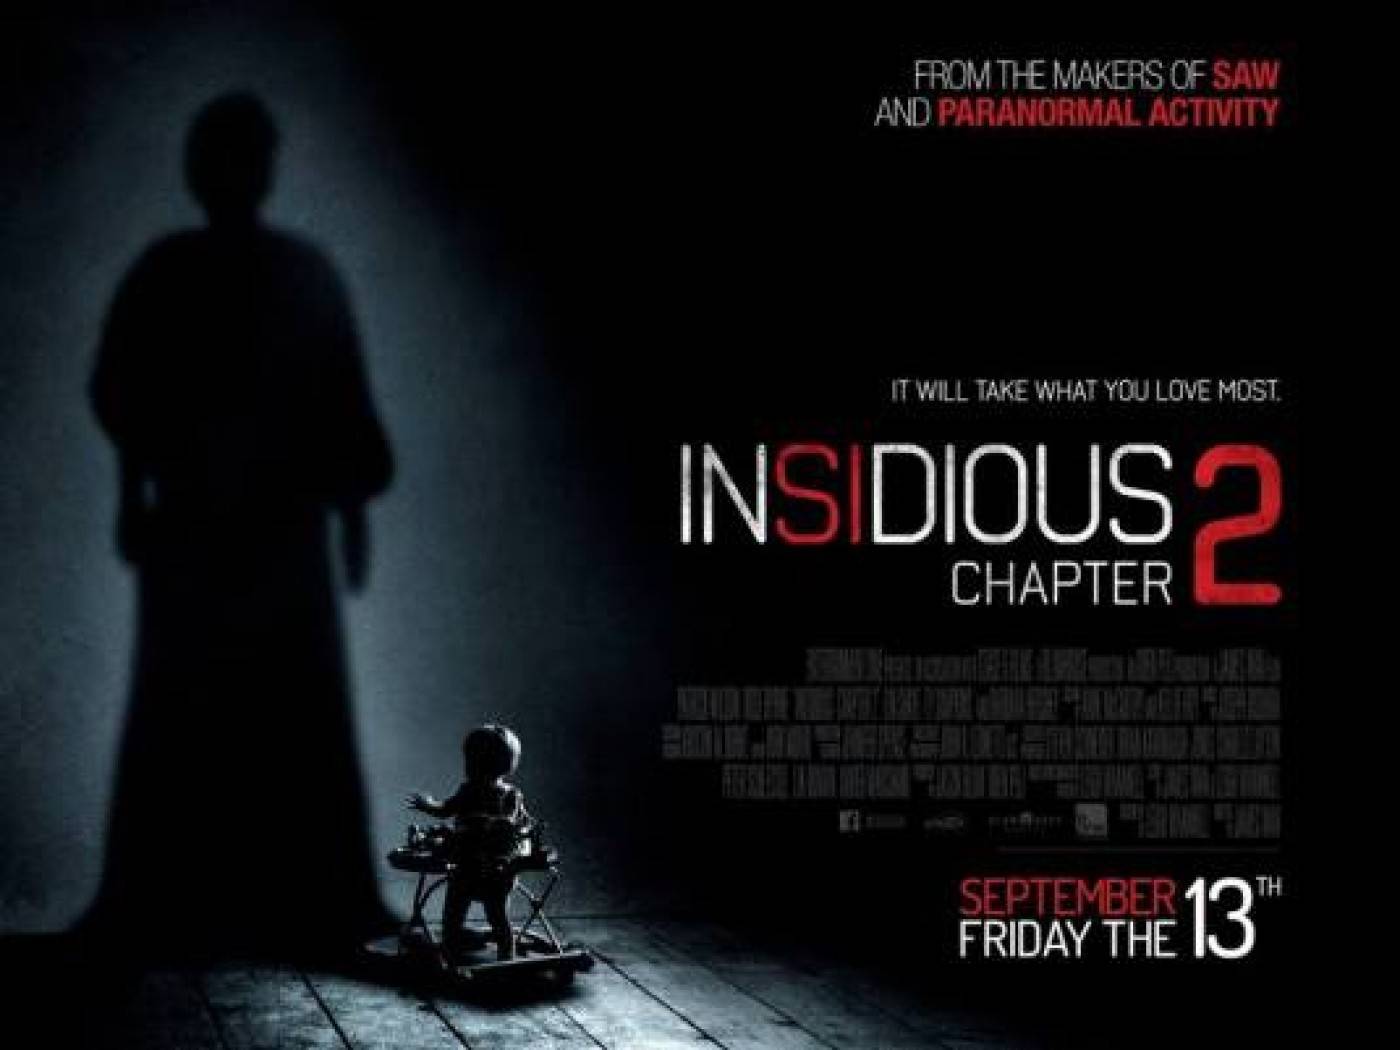 Insidious 2 Wallpaper - Insidious Chapter 2 Movie Poster , HD Wallpaper & Backgrounds